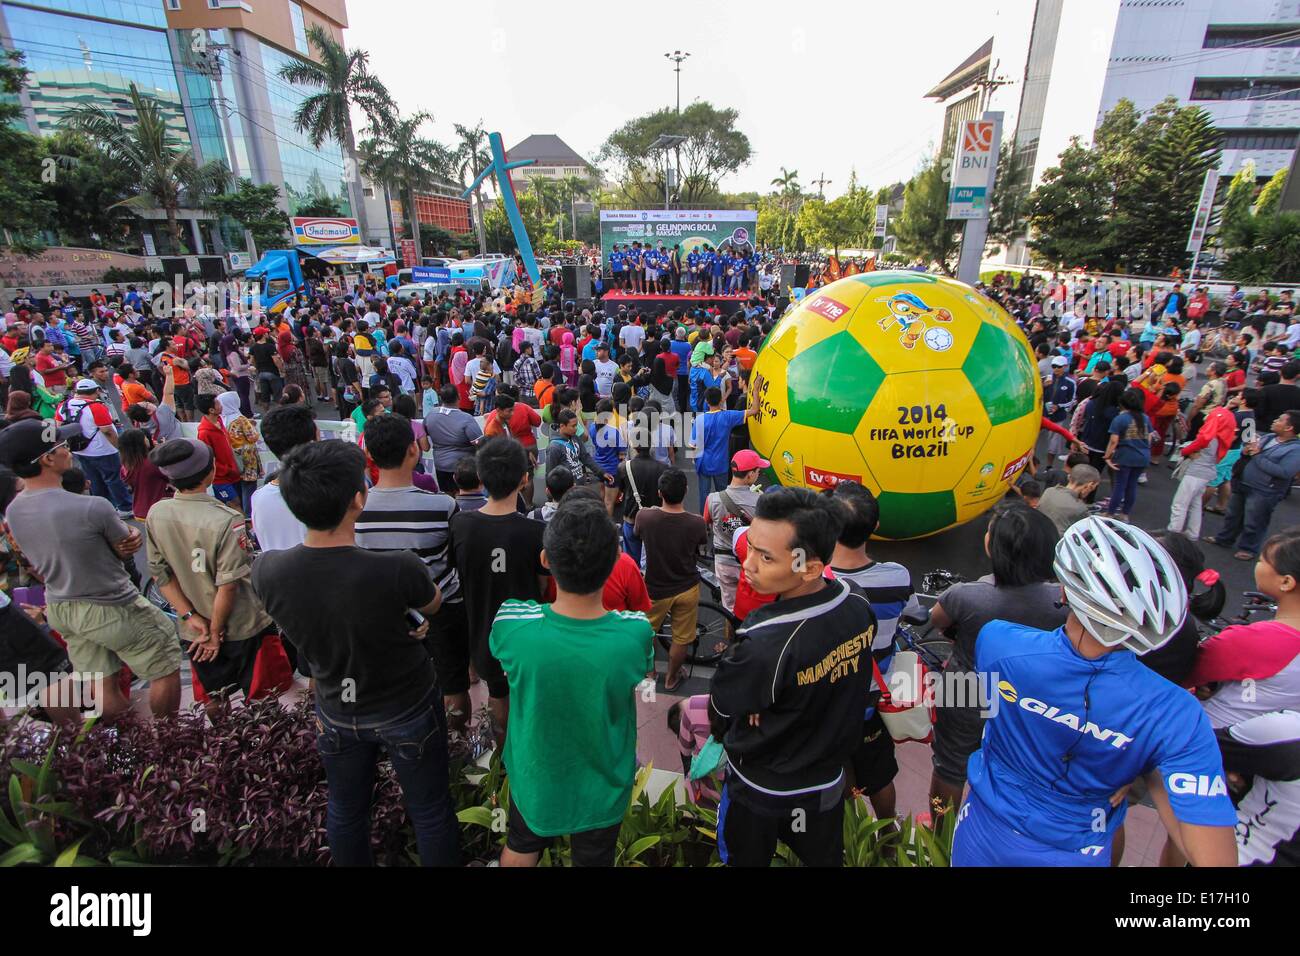 Semarang, Central Java, Indonesia. 25th May, 2014. SEMARANG, CENTRAL JAVA, INDONESIA - MAY 25: Indonesian peoples lifting giant ball to welcome the 2014 FIFA World Cup, International men's football tournament scheduled to take place in Brazil from 12 June to 13 July 2014, in Semarang, Central Java, Indonesia on May 25, 2014. Credit:  Sijori Images/ZUMAPRESS.com/Alamy Live News Stock Photo